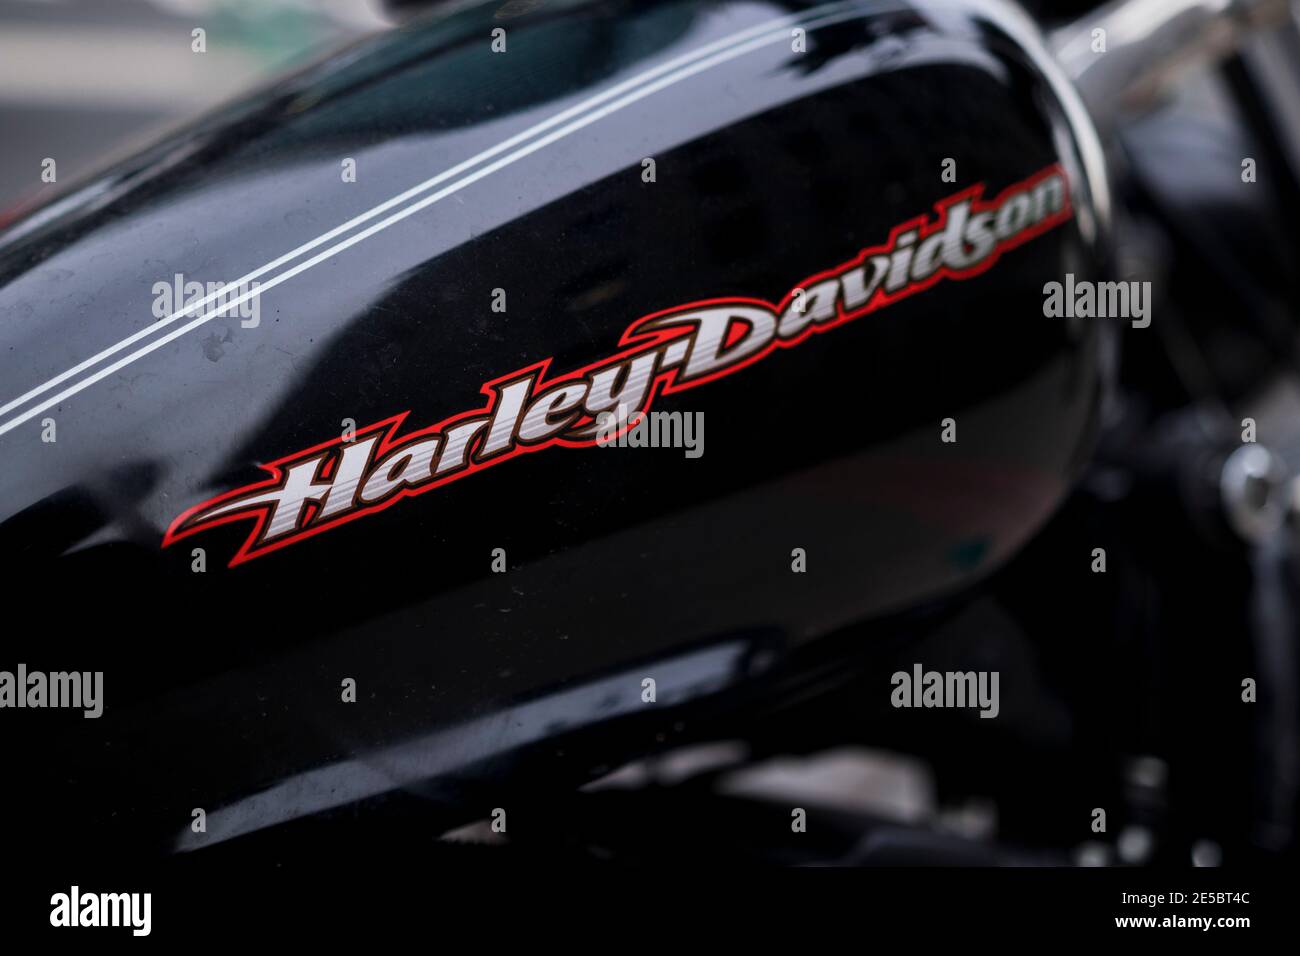 Closeup image of Harley-Davidson logo in a motorcycle Stock Photo - Alamy